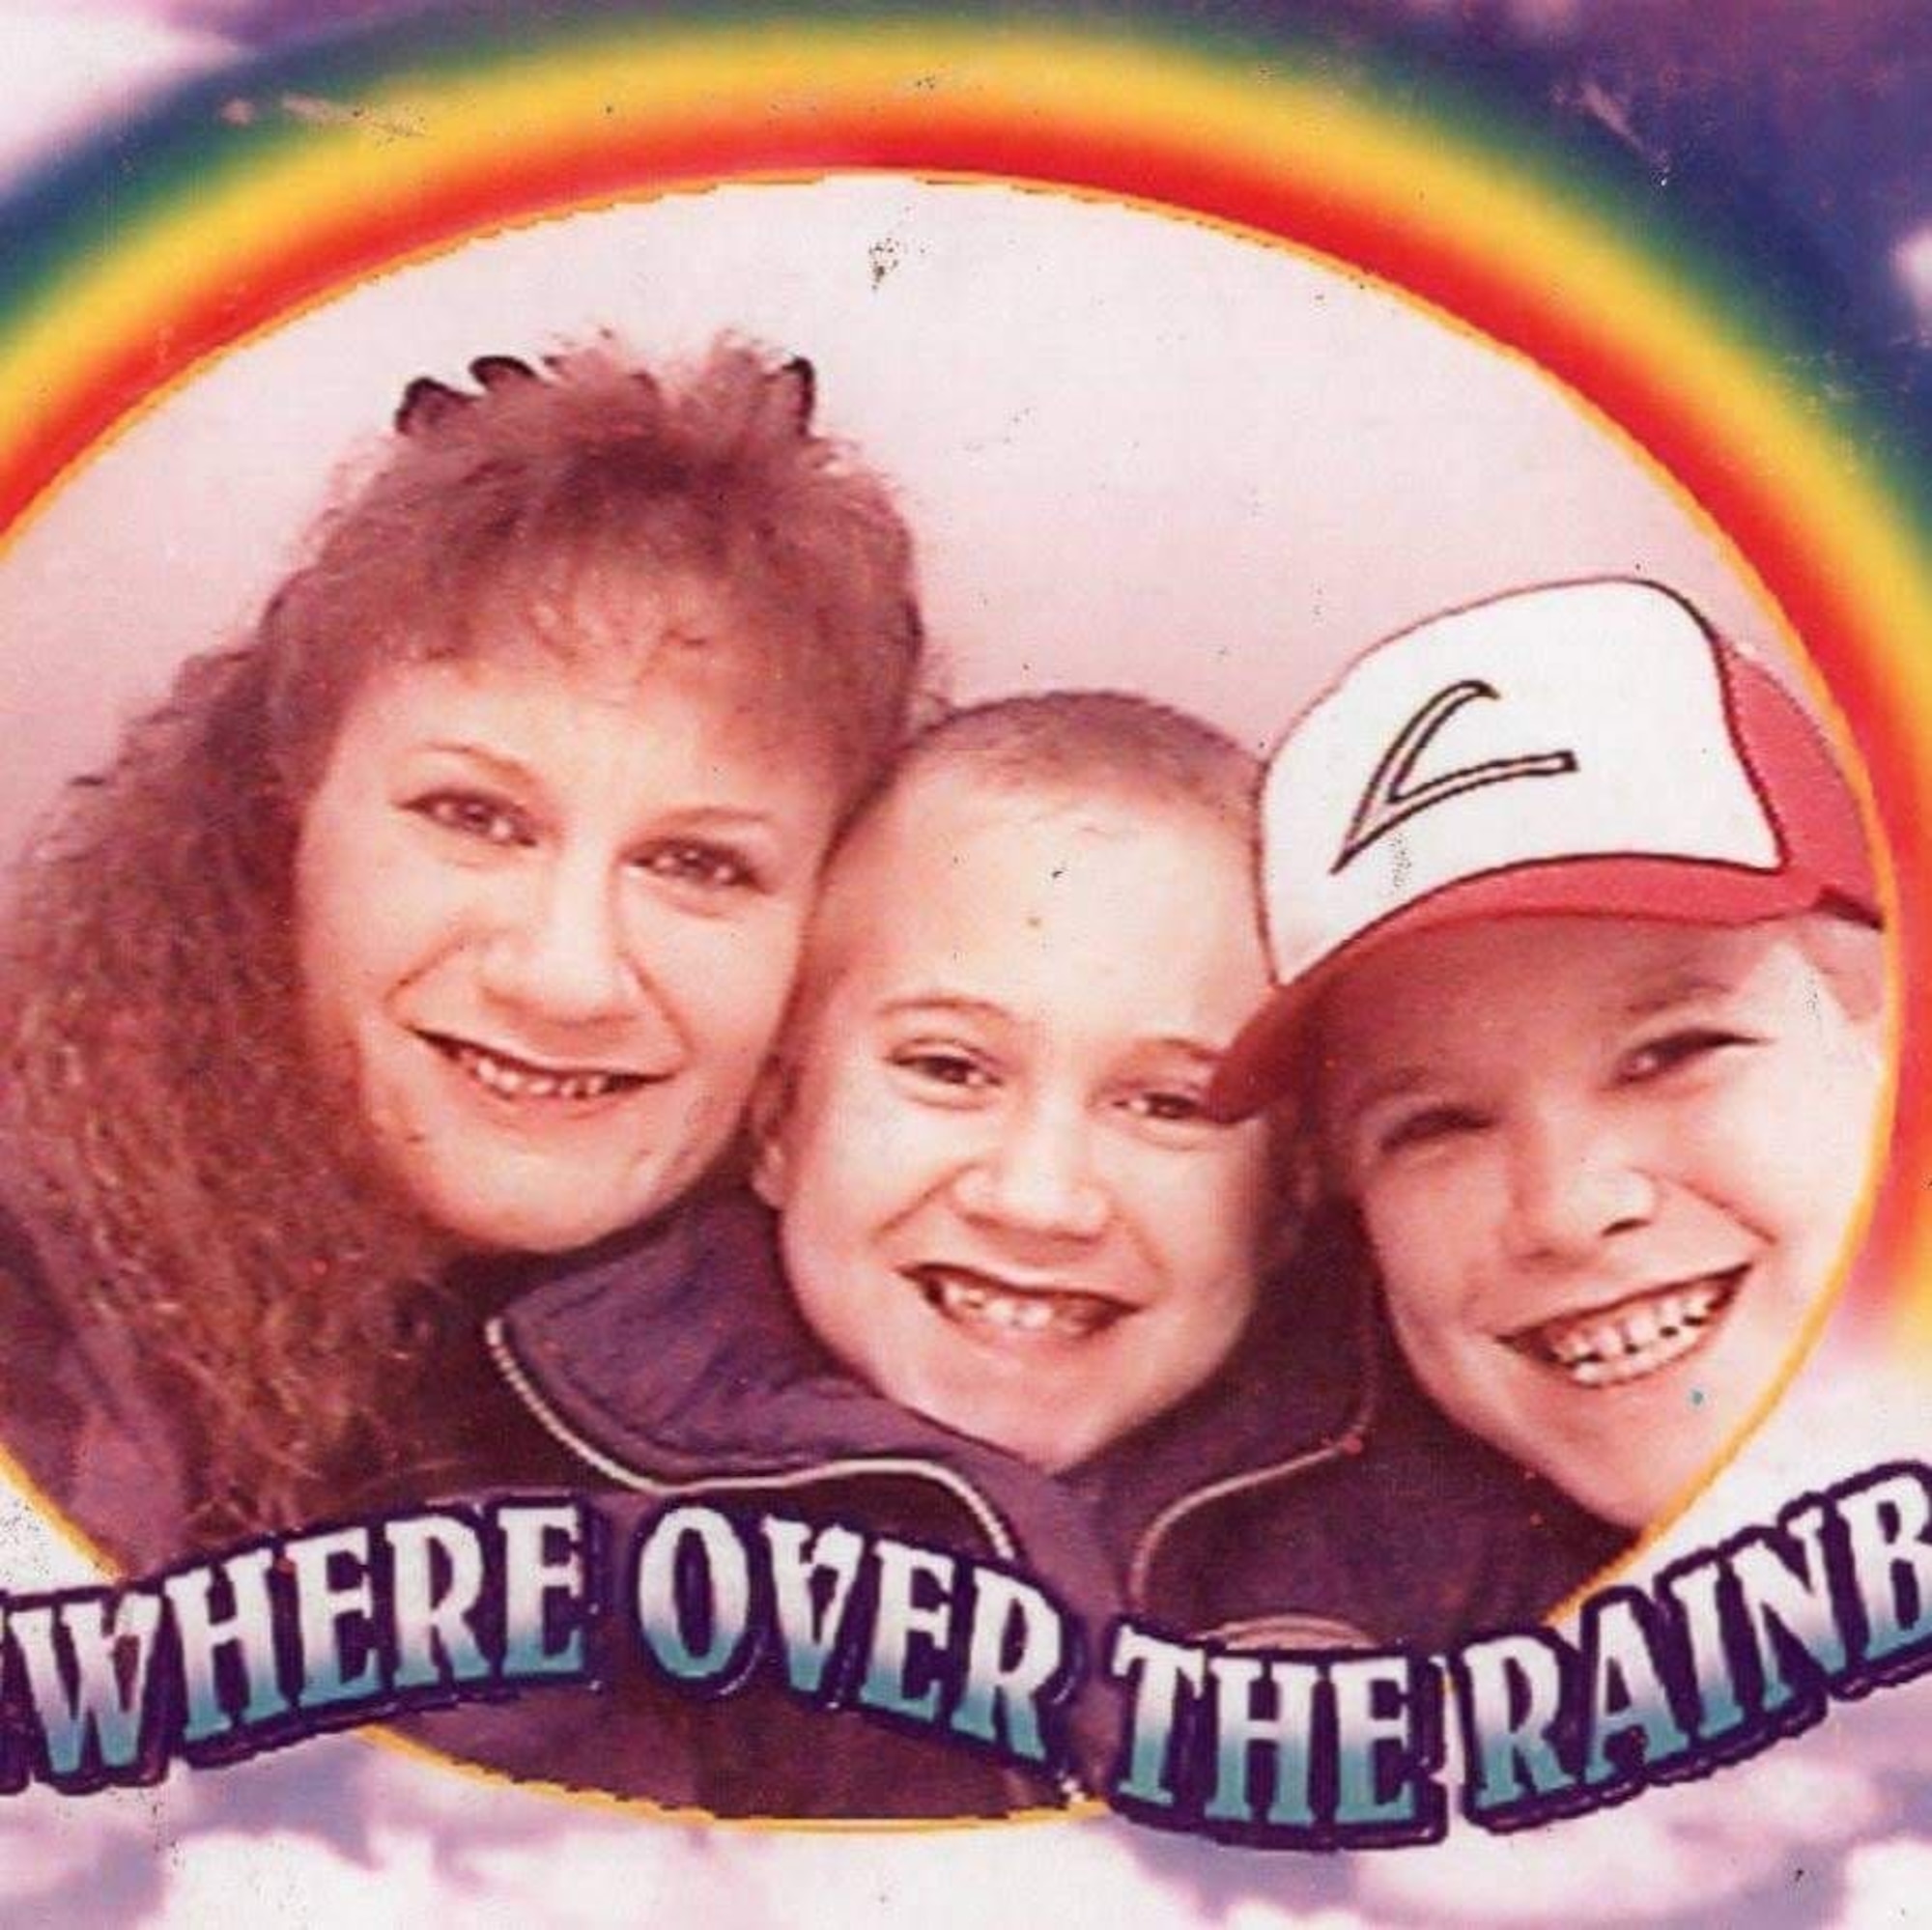 Jamie Sue Hightower, left, Ryan Taylor, center, and Erik take a family photo at a photo booth in a local mall in Little Rock, Arkansas, 1998.